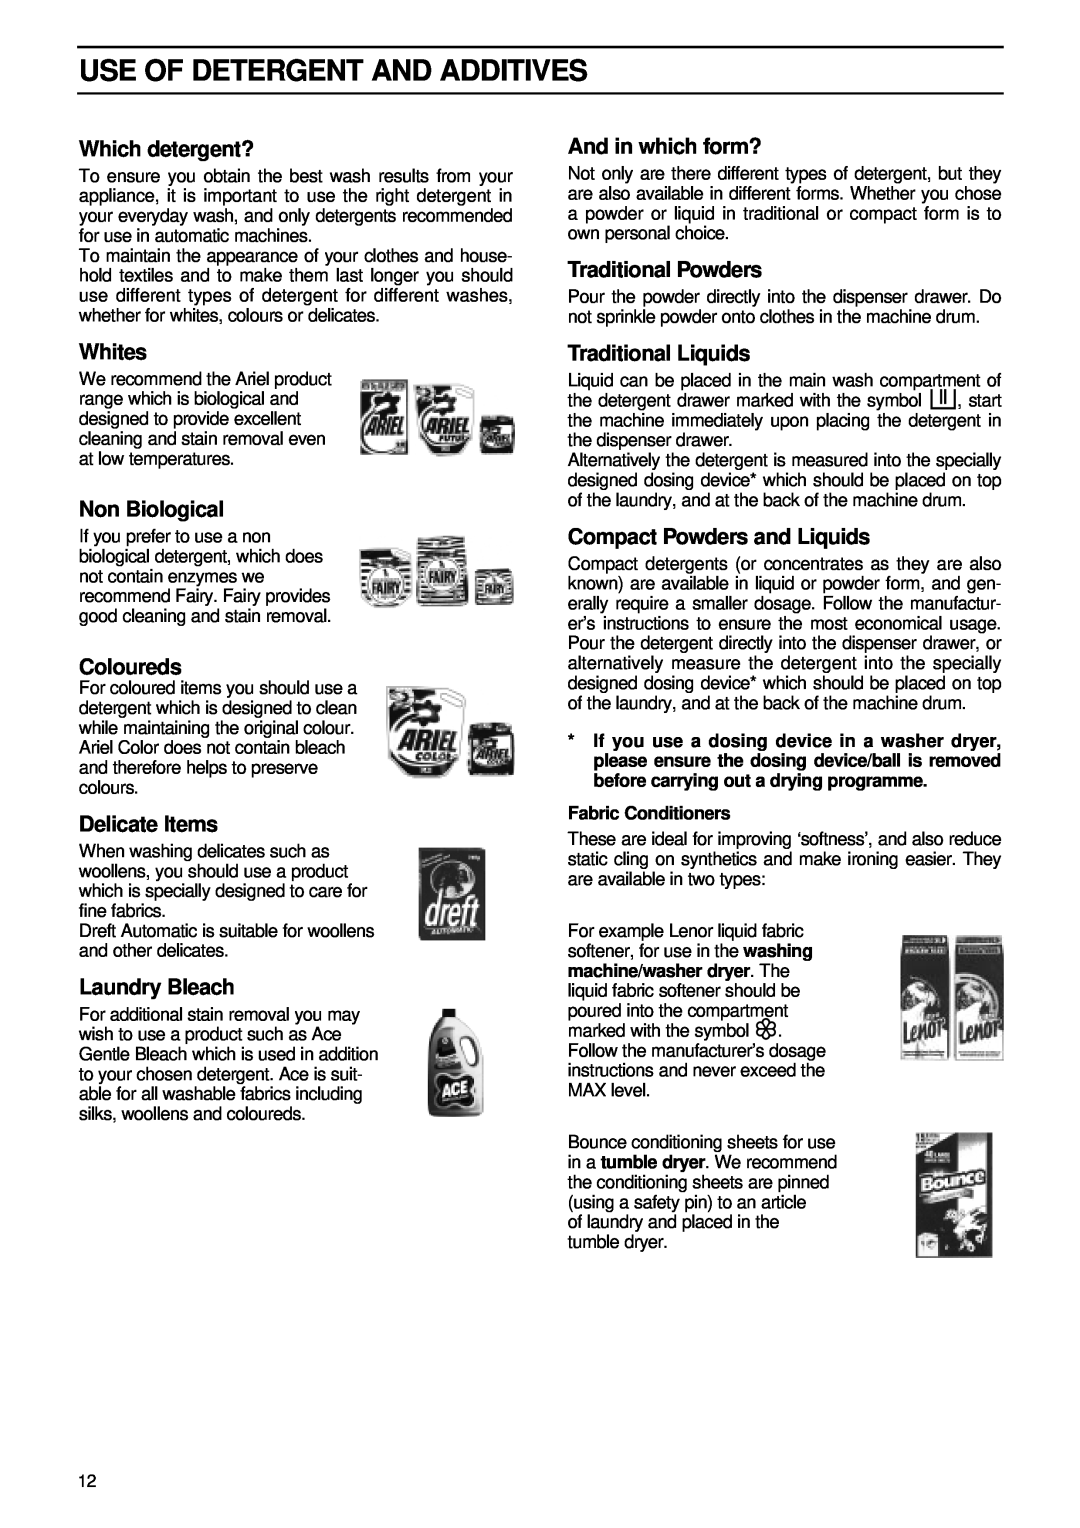 Zanussi FL 1085 manual Use Of Detergent And Additives, Which detergent?, Whites, Non Biological, Coloureds, Delicate Items 